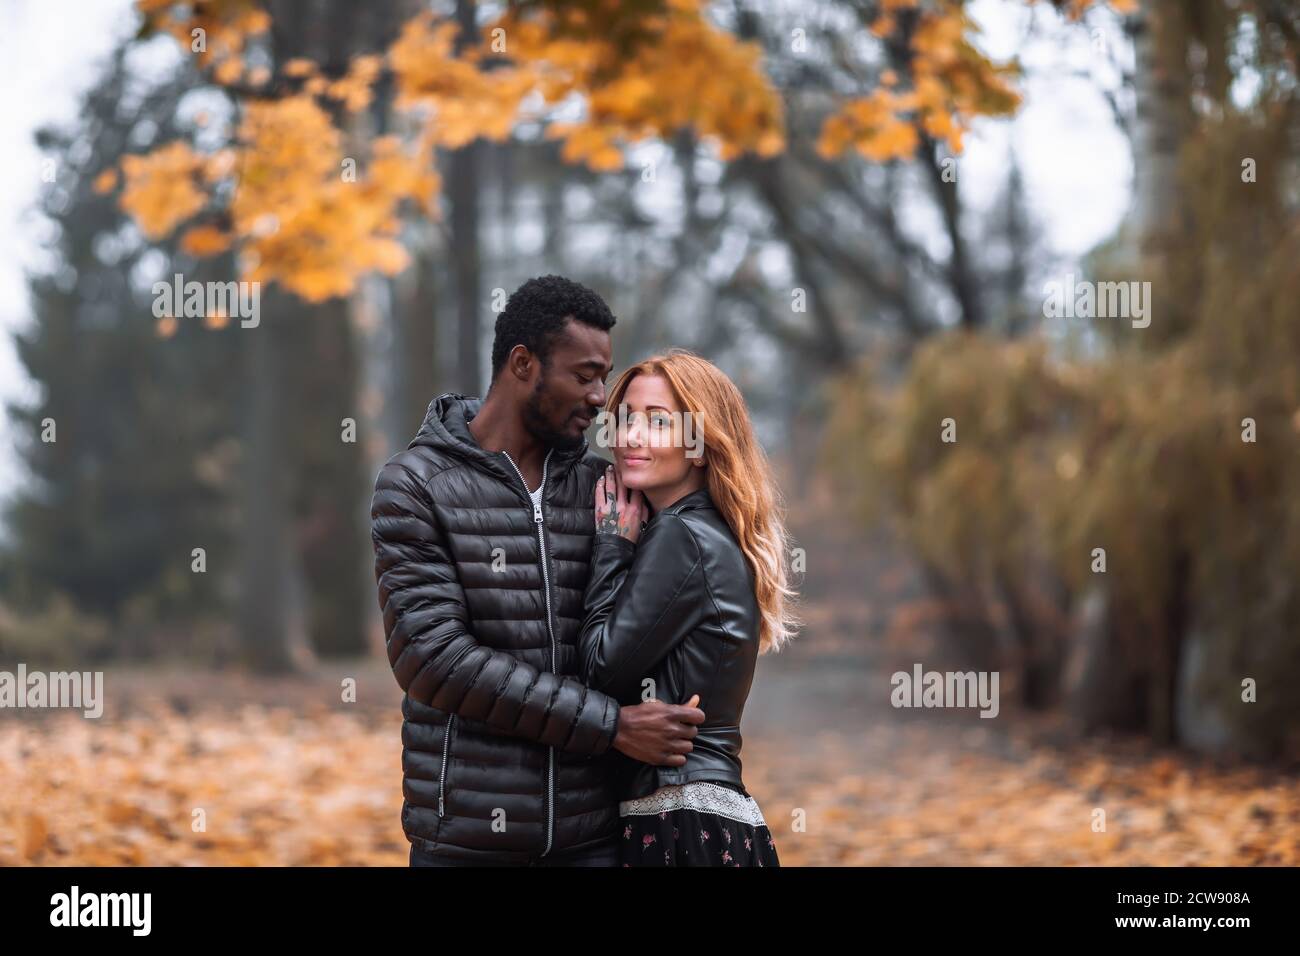 Happy cute Interracial couple posing in blurry autumn park background, black man and white redhead woman Stock Photo